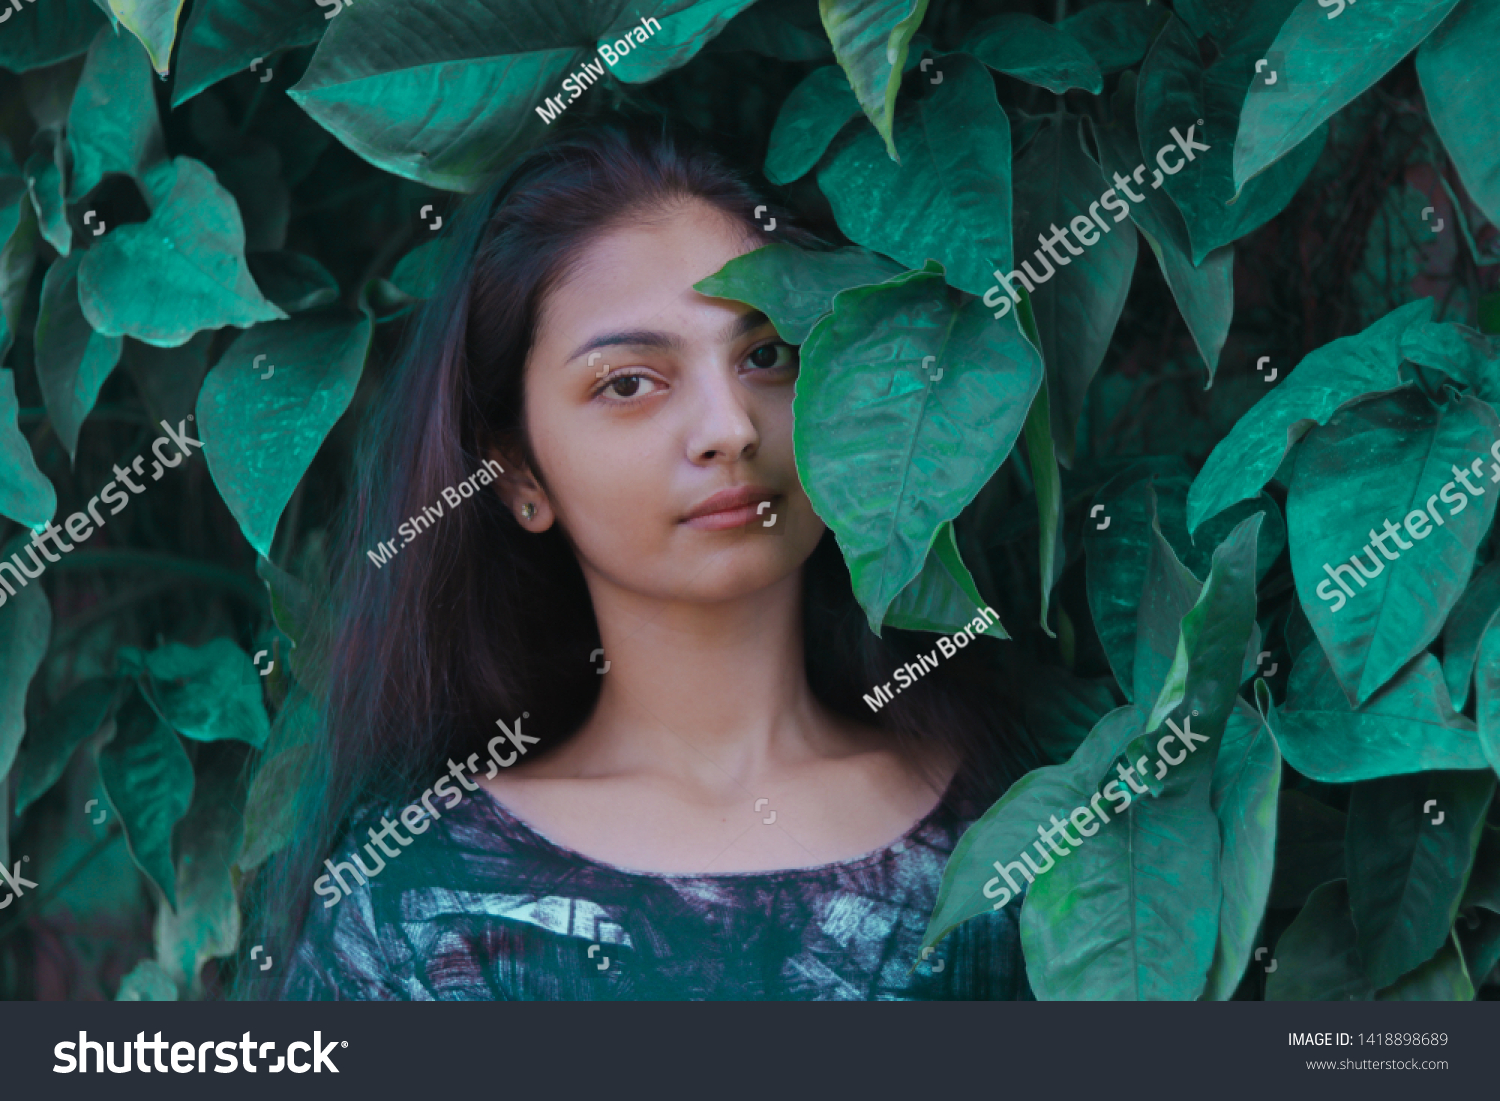 A beautiful girl standing in between leaves. #1418898689